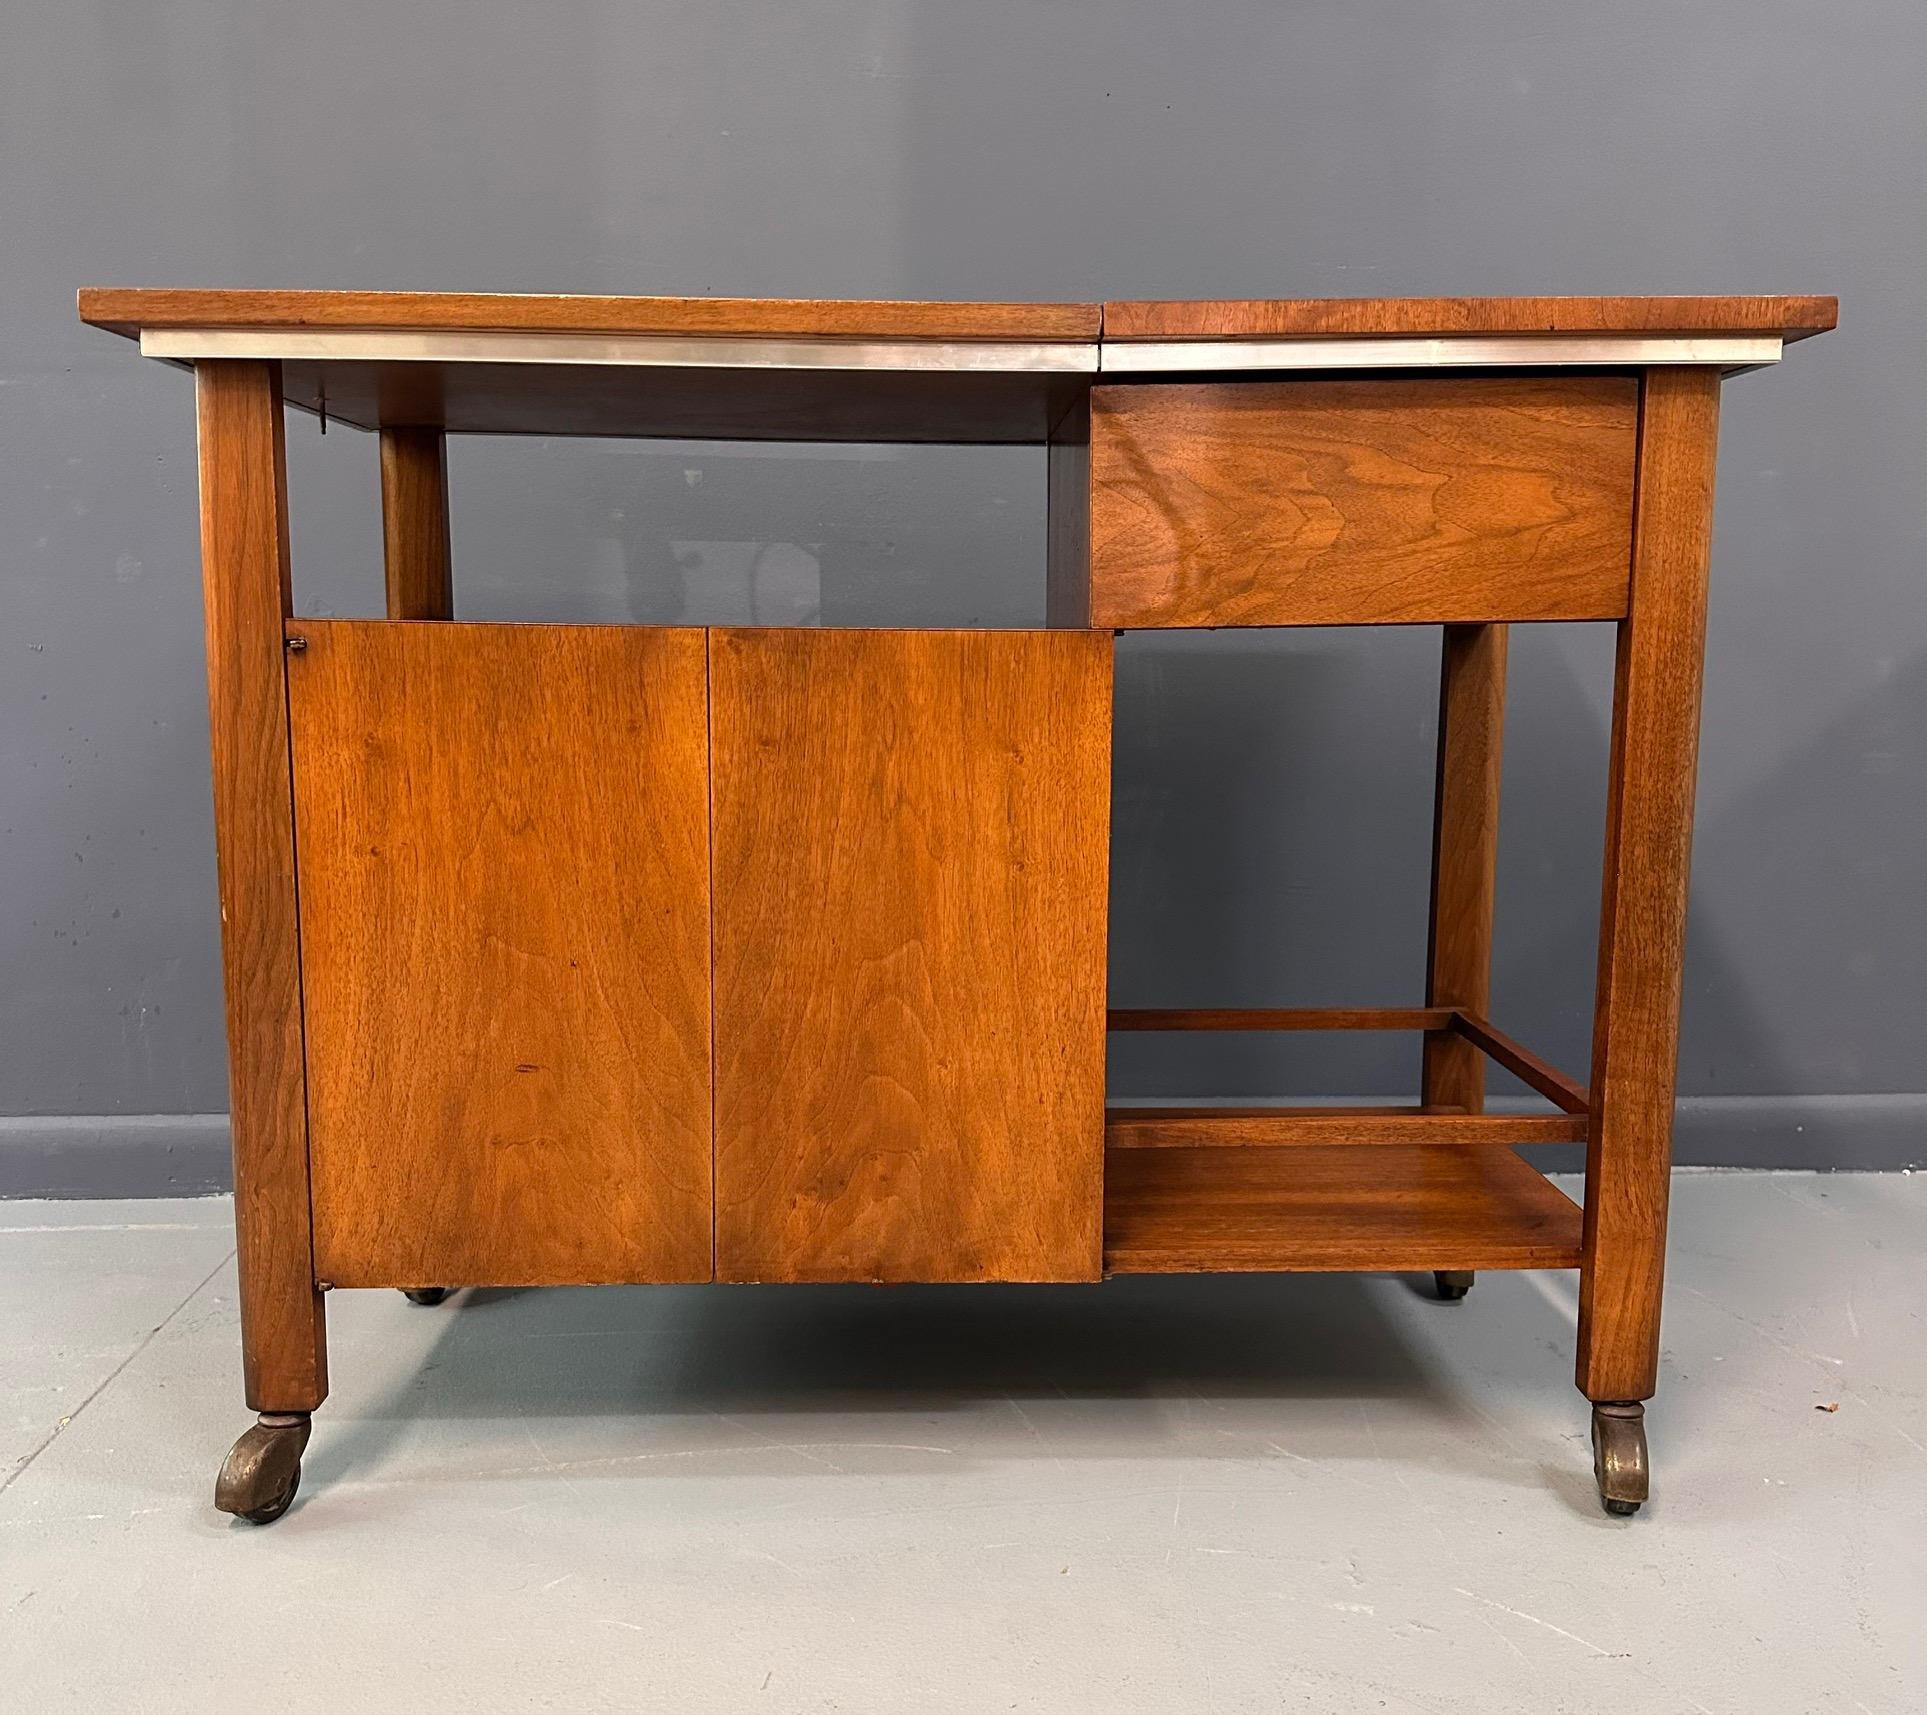 This striking John Widdicomb bar cart or serving cart has several great features: a terrific graphic quality with a dynamic composition of clear and opaque shapes, a top that expands for additional work surface (including hard-wearing and water